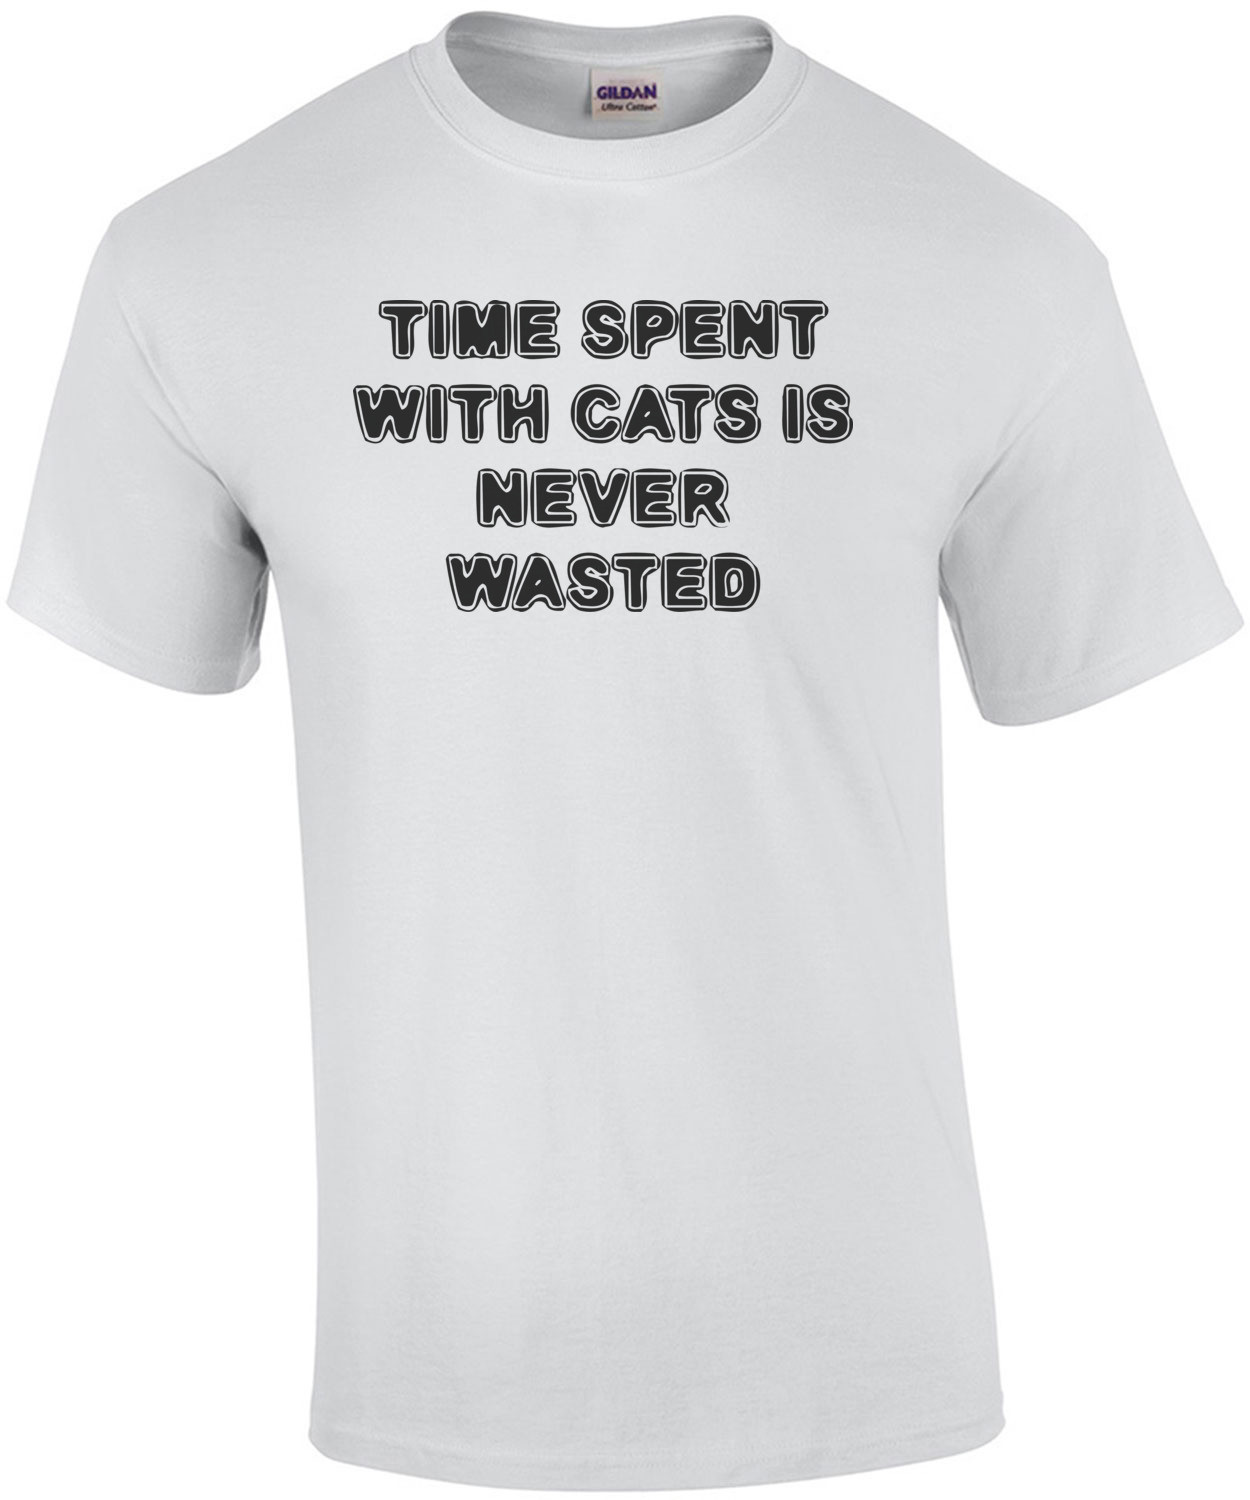 TIME SPENT WITH CATS IS NEVER WASTED Funny Shirt